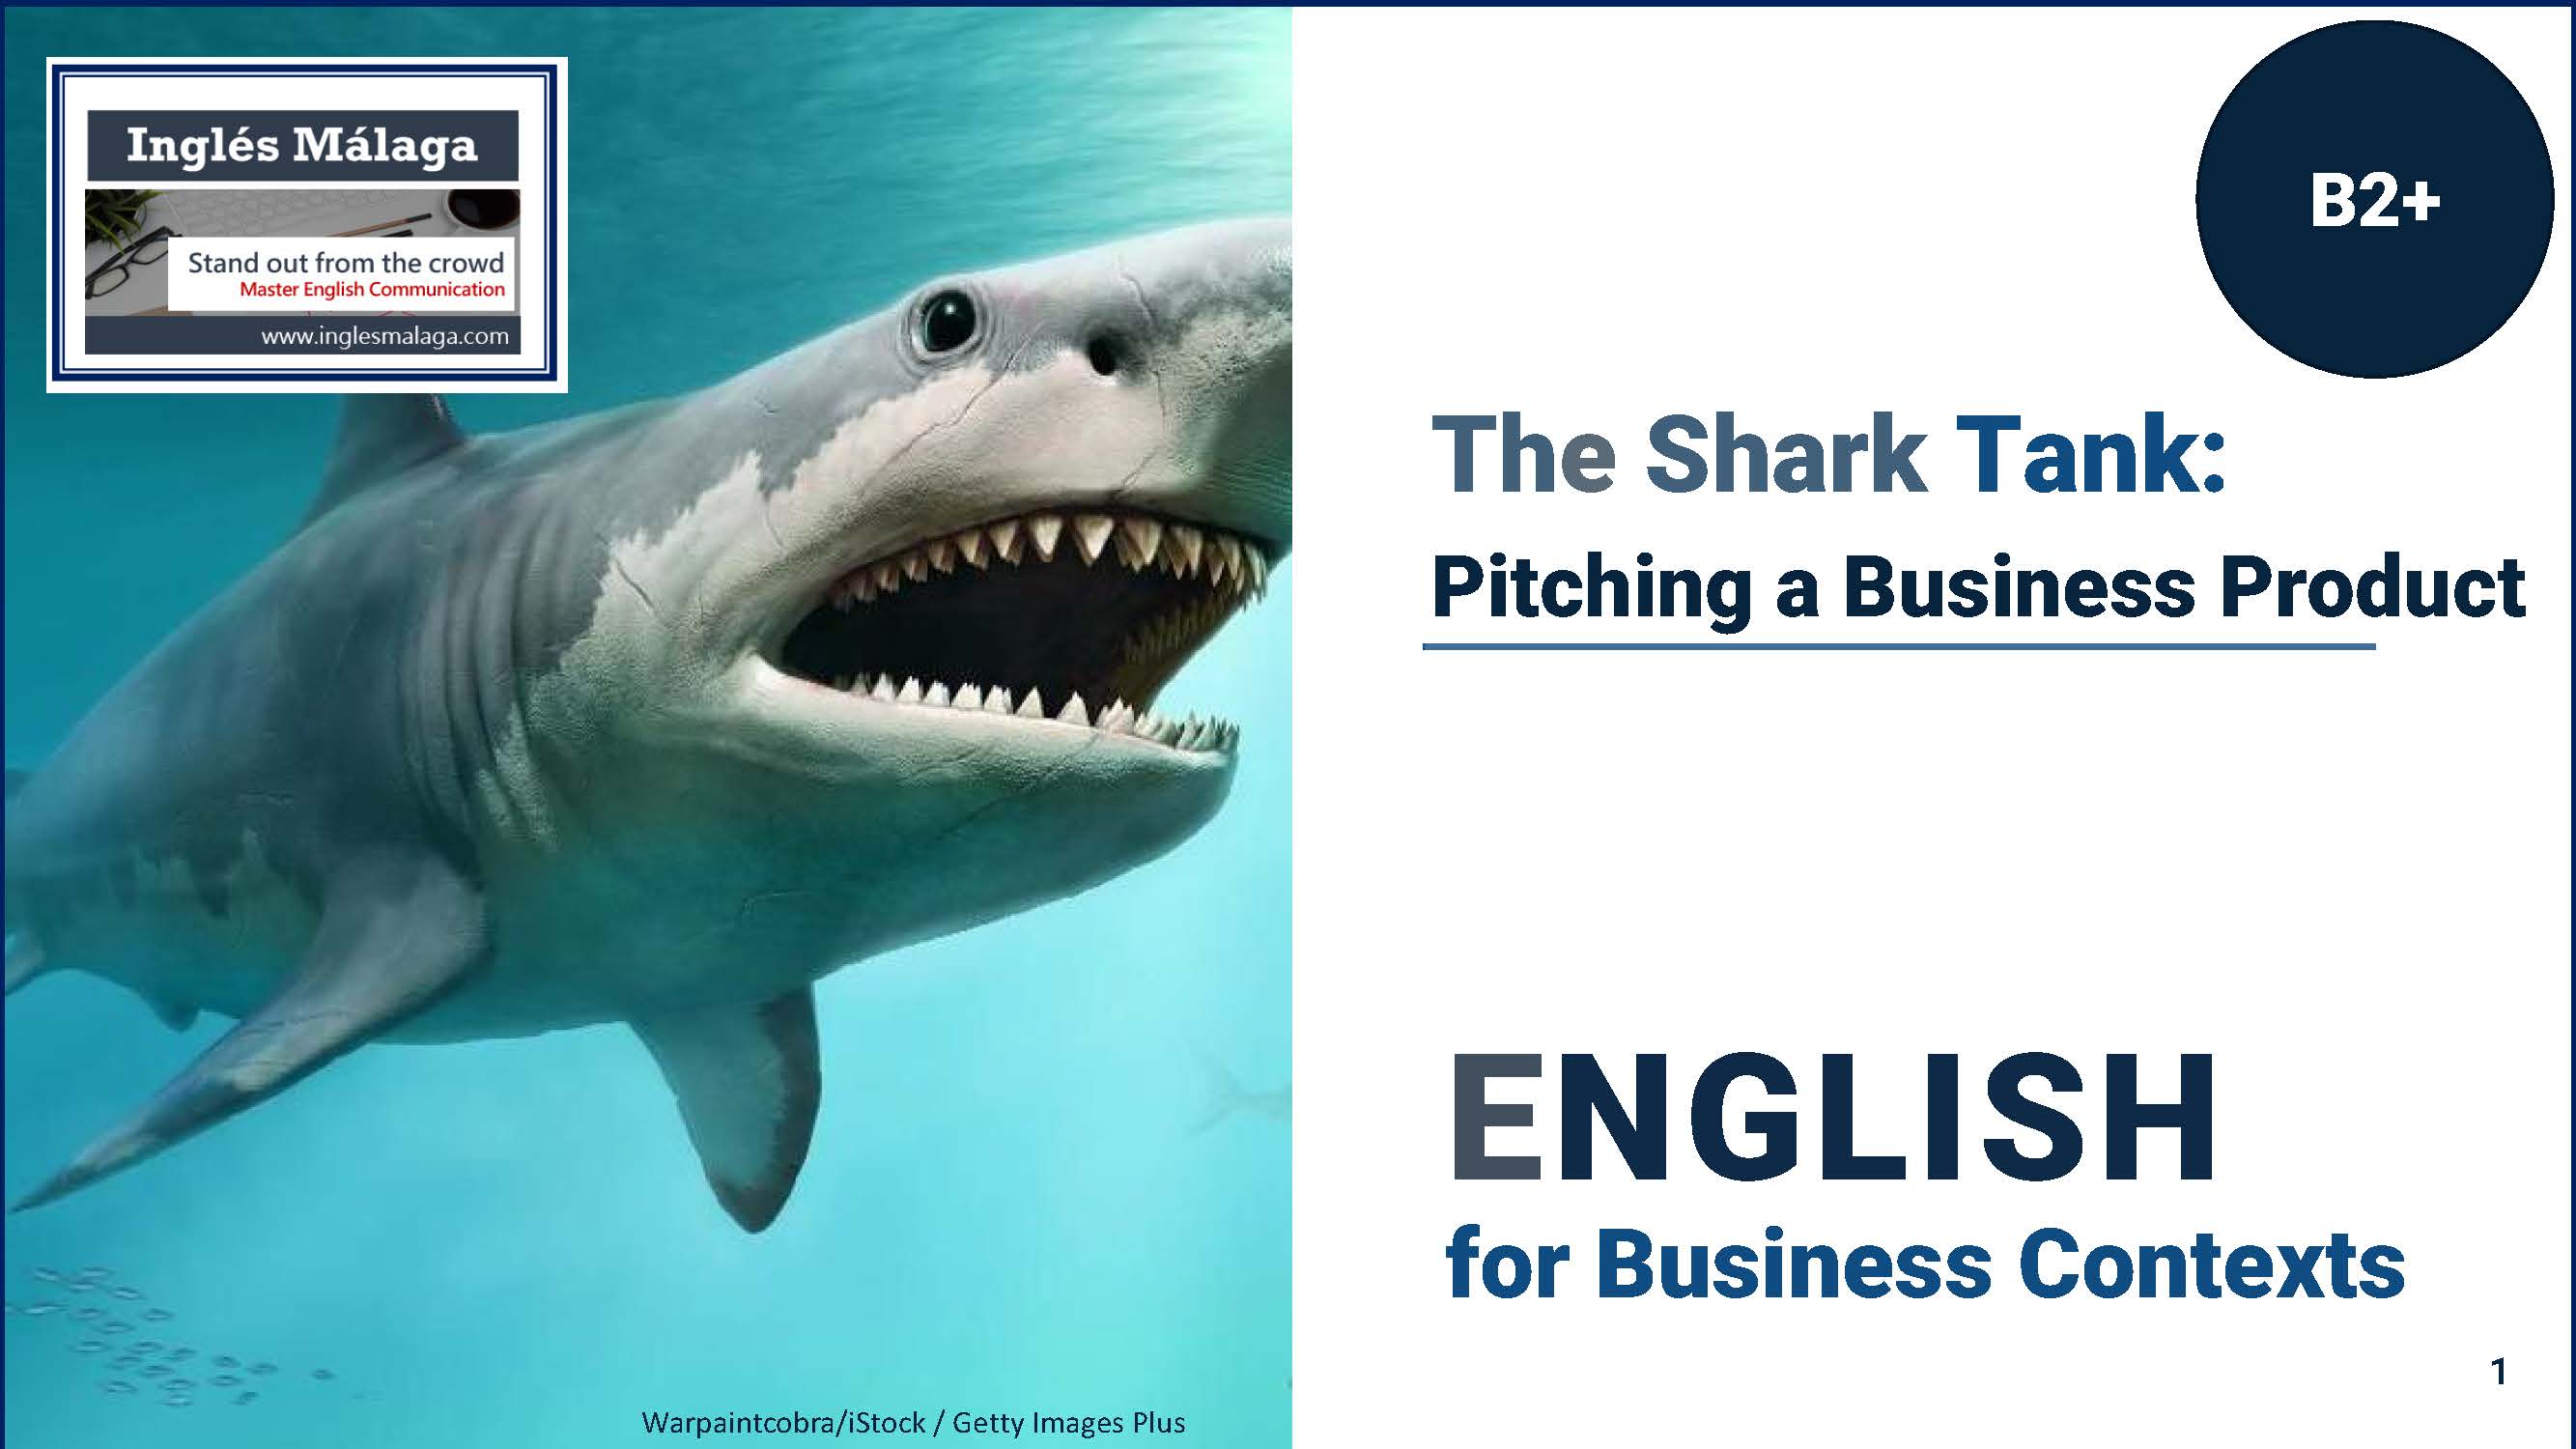 lesson-plans-shark-tank-pitch-business-product-ingl-s-m-laga